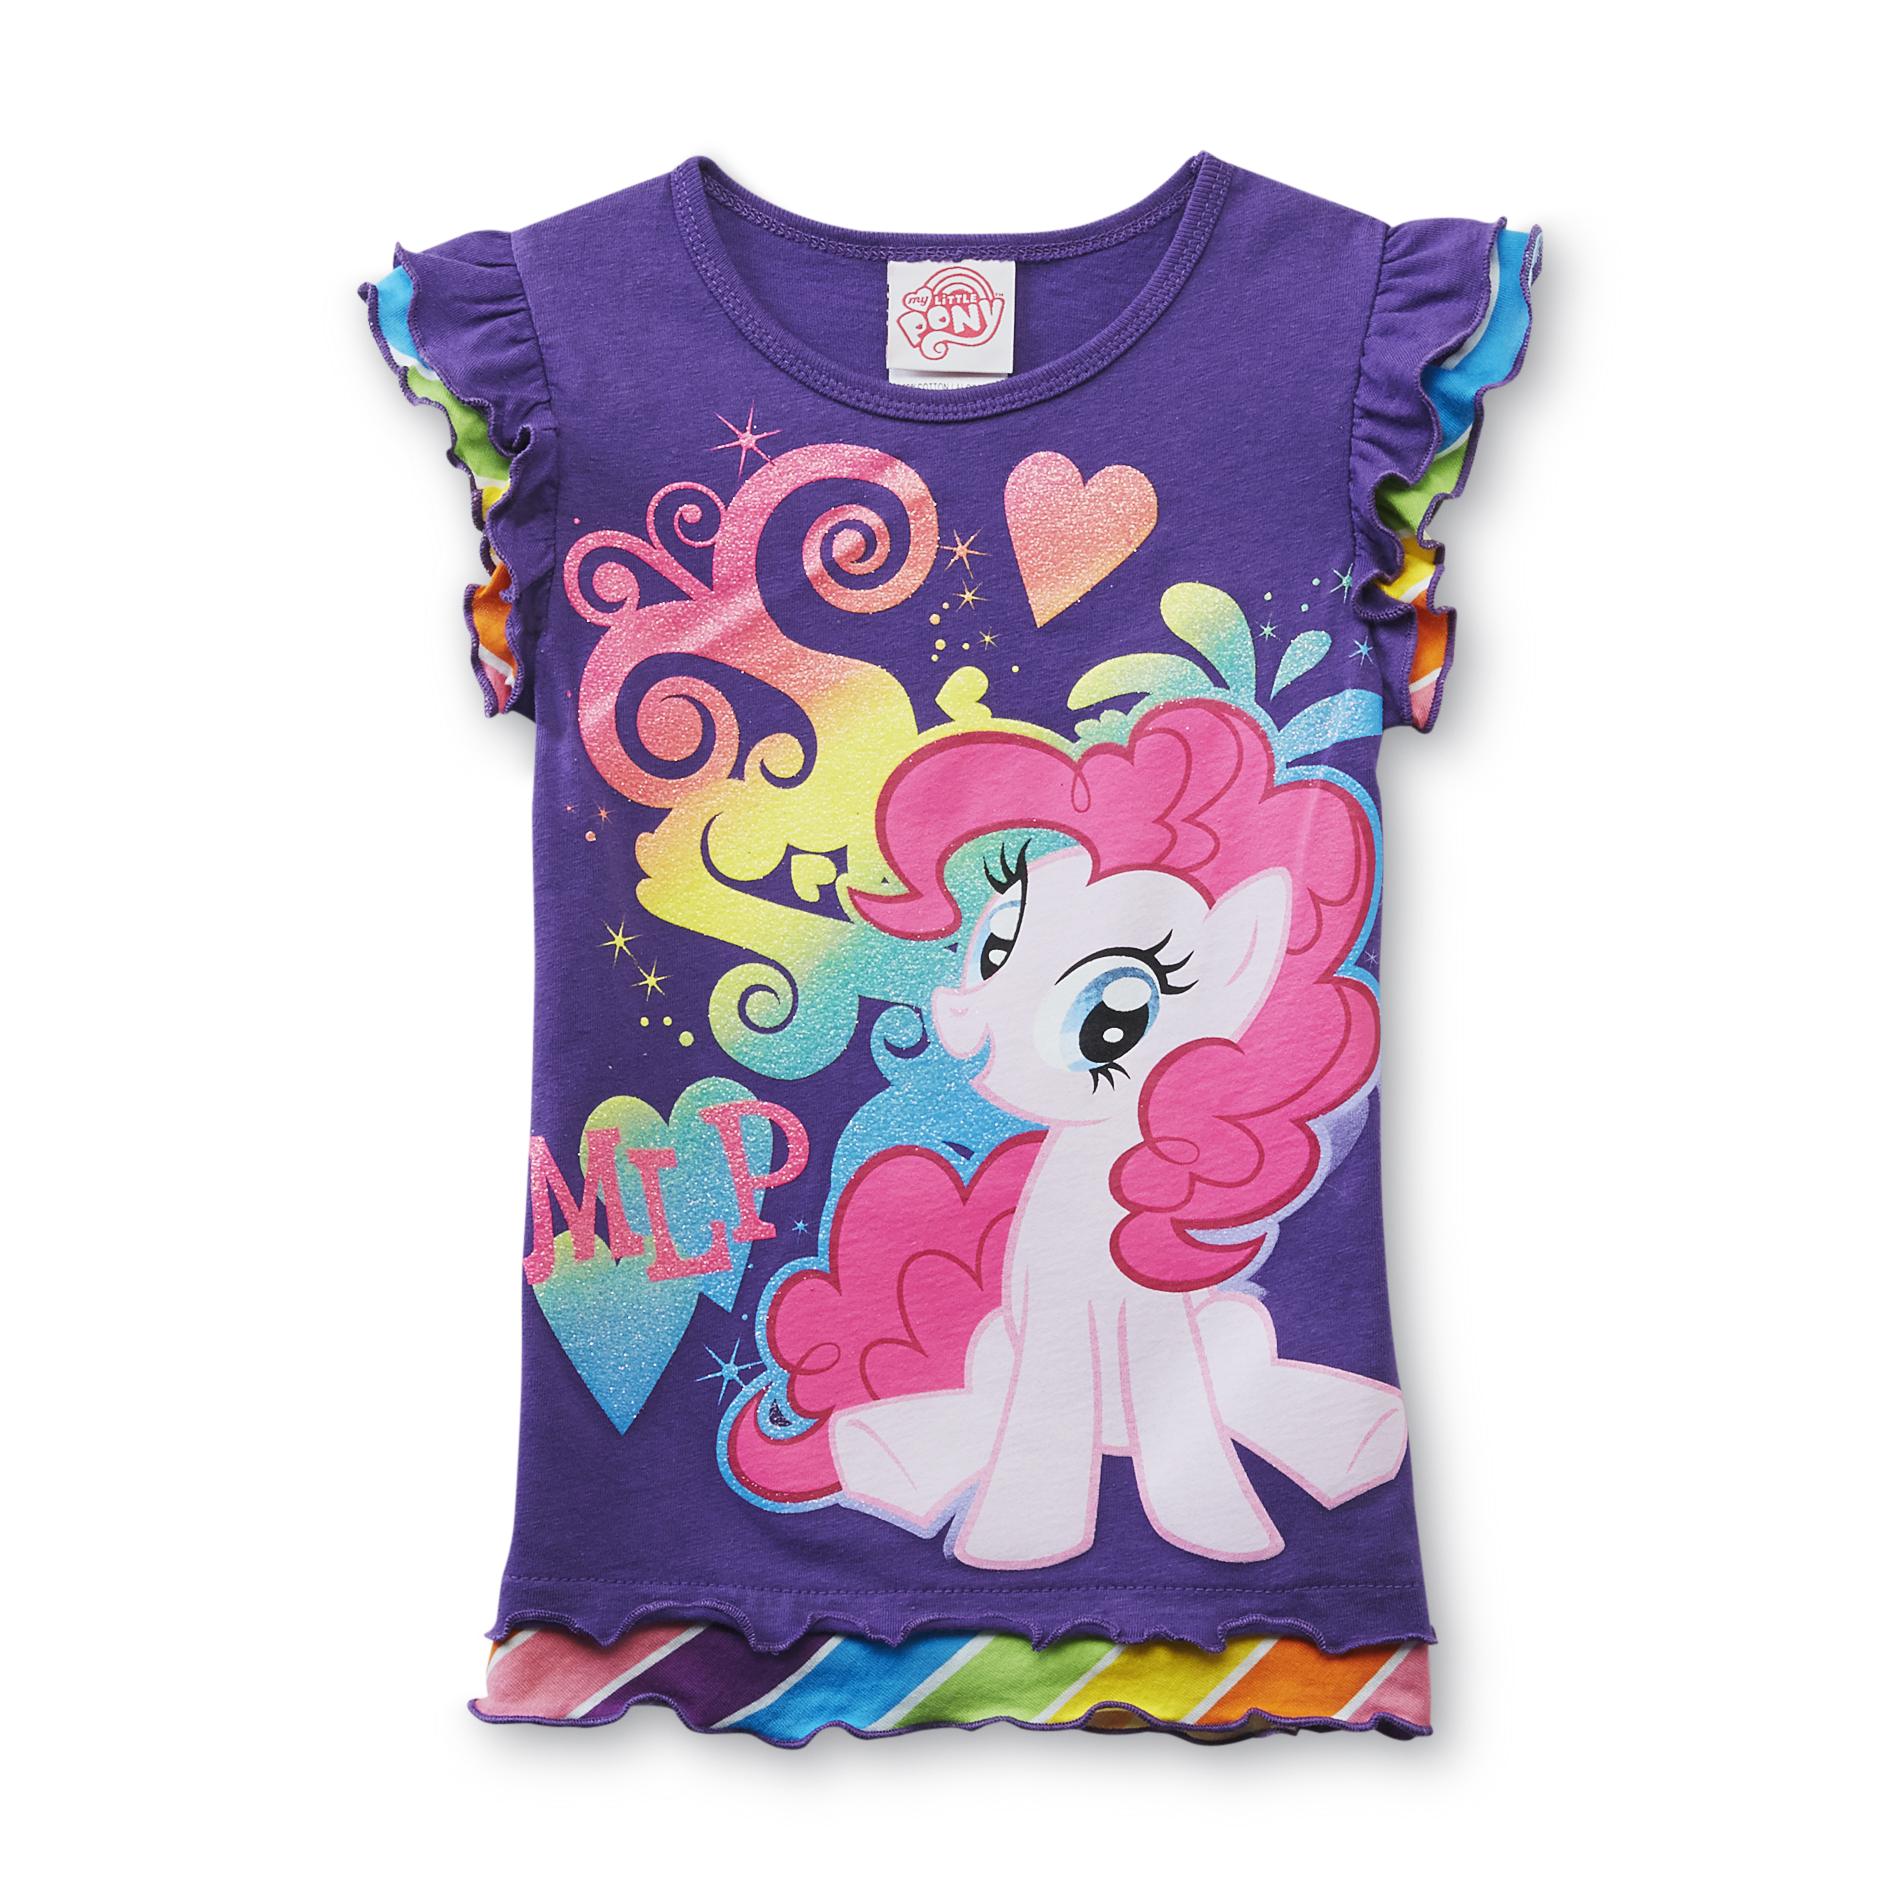 My Little Pony Girl's Layered-Look Graphic T-Shirt - Pinkie Pie